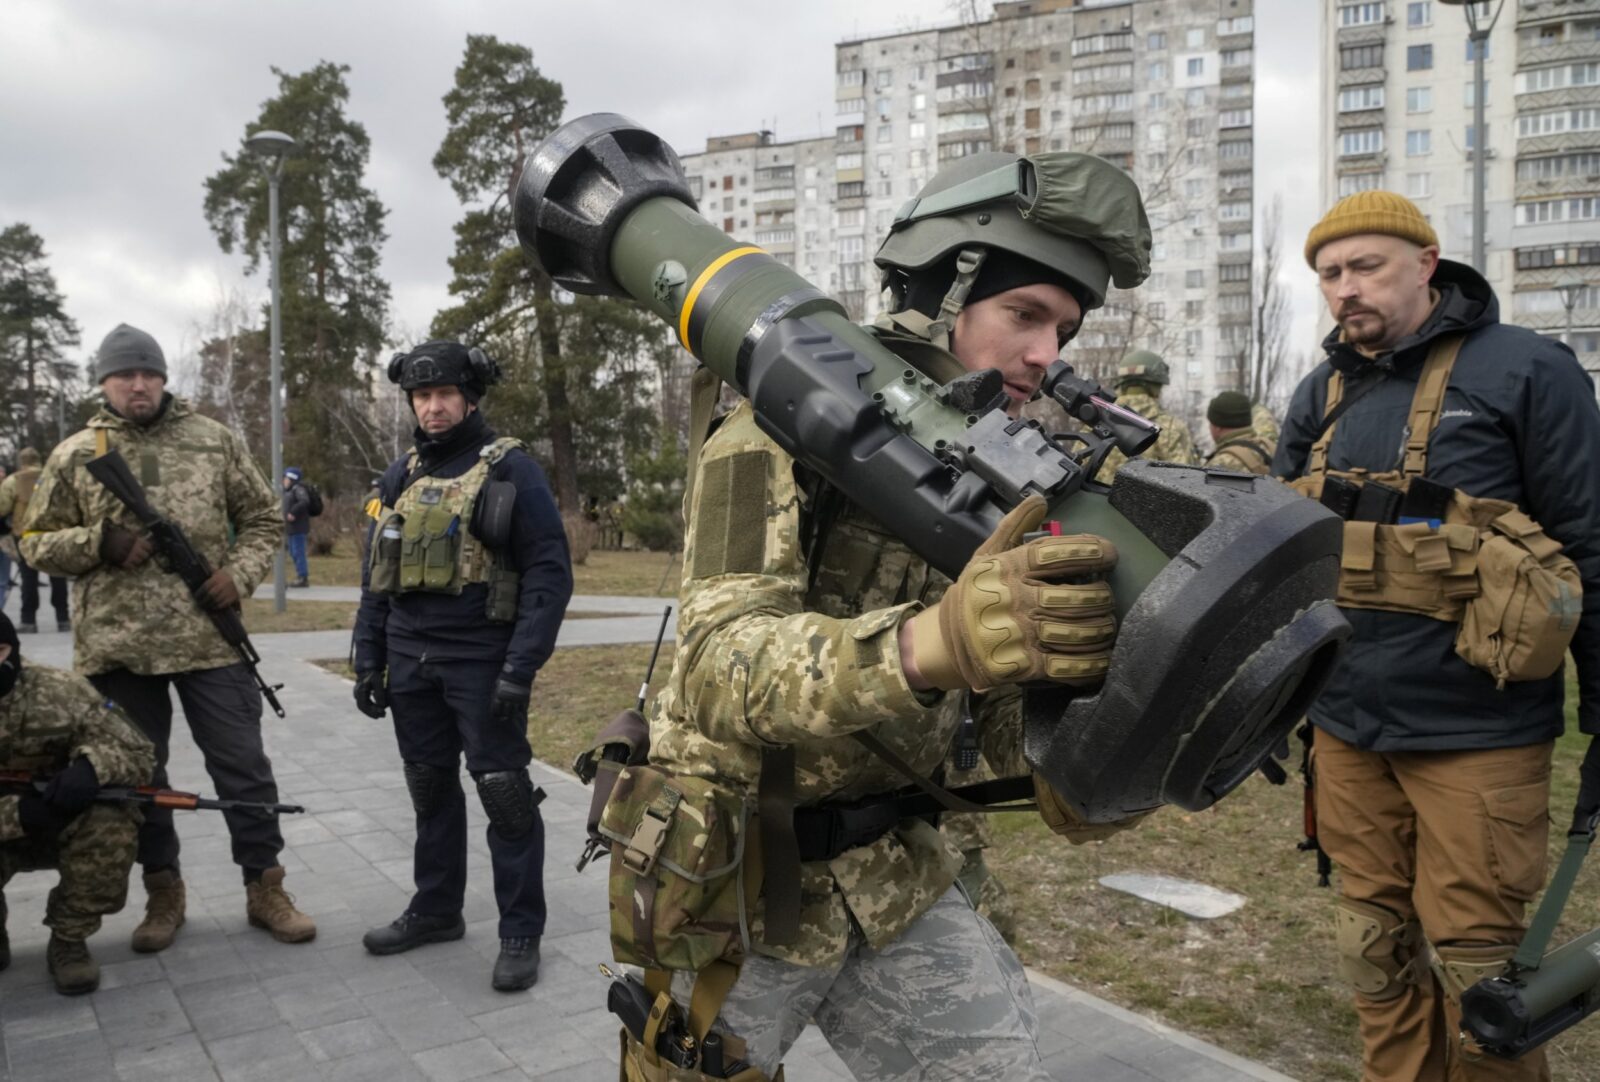 Ukraine-Russia Isn’t a War, It’s a License to Steal. Biden & Democrats are Stealing YOUR Money